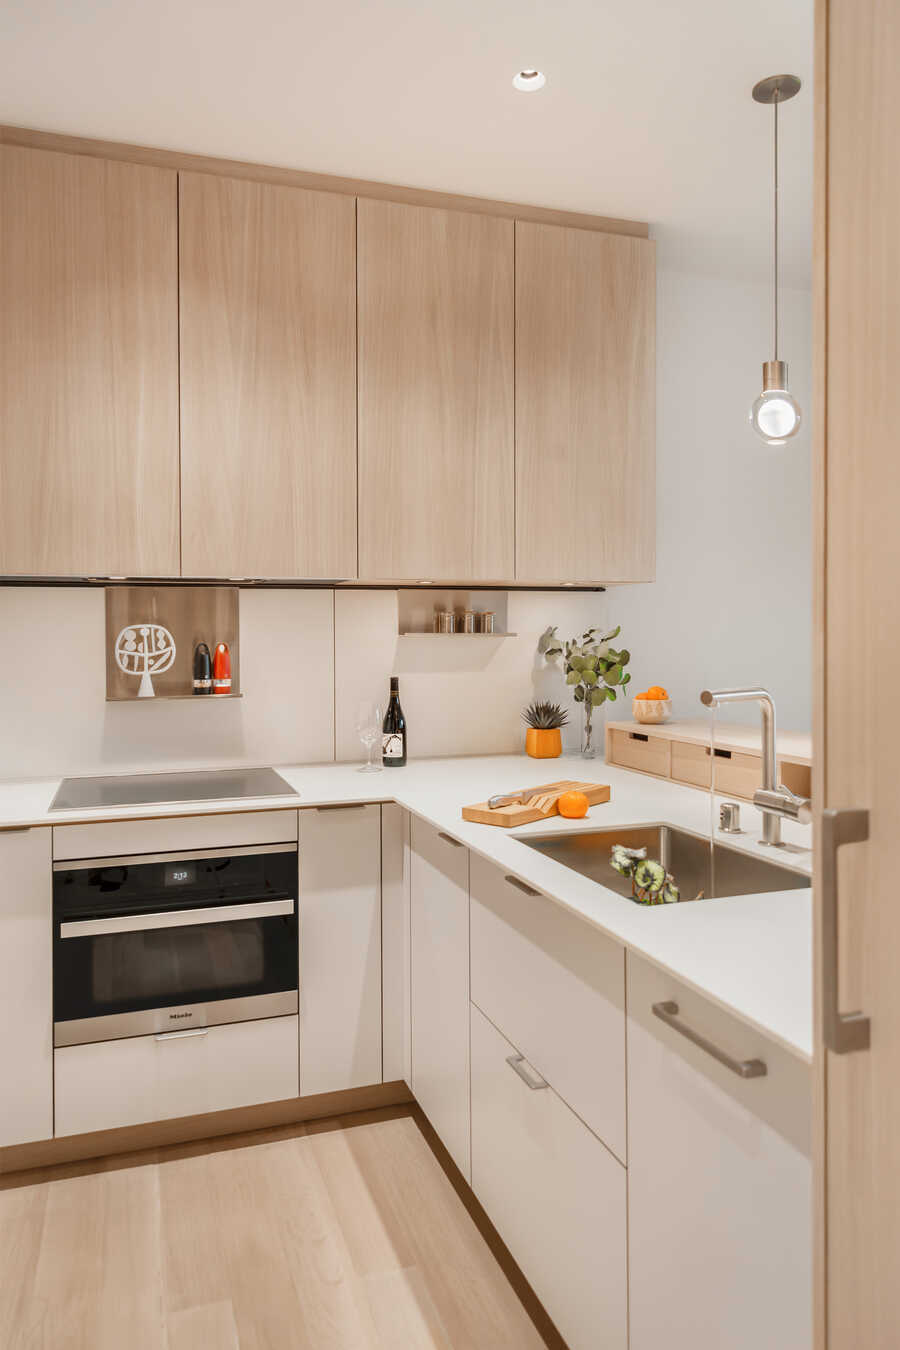 By Removing a Wall Full of Cabinets, this Small Kitchen Feels Larger and Looks Refreshed